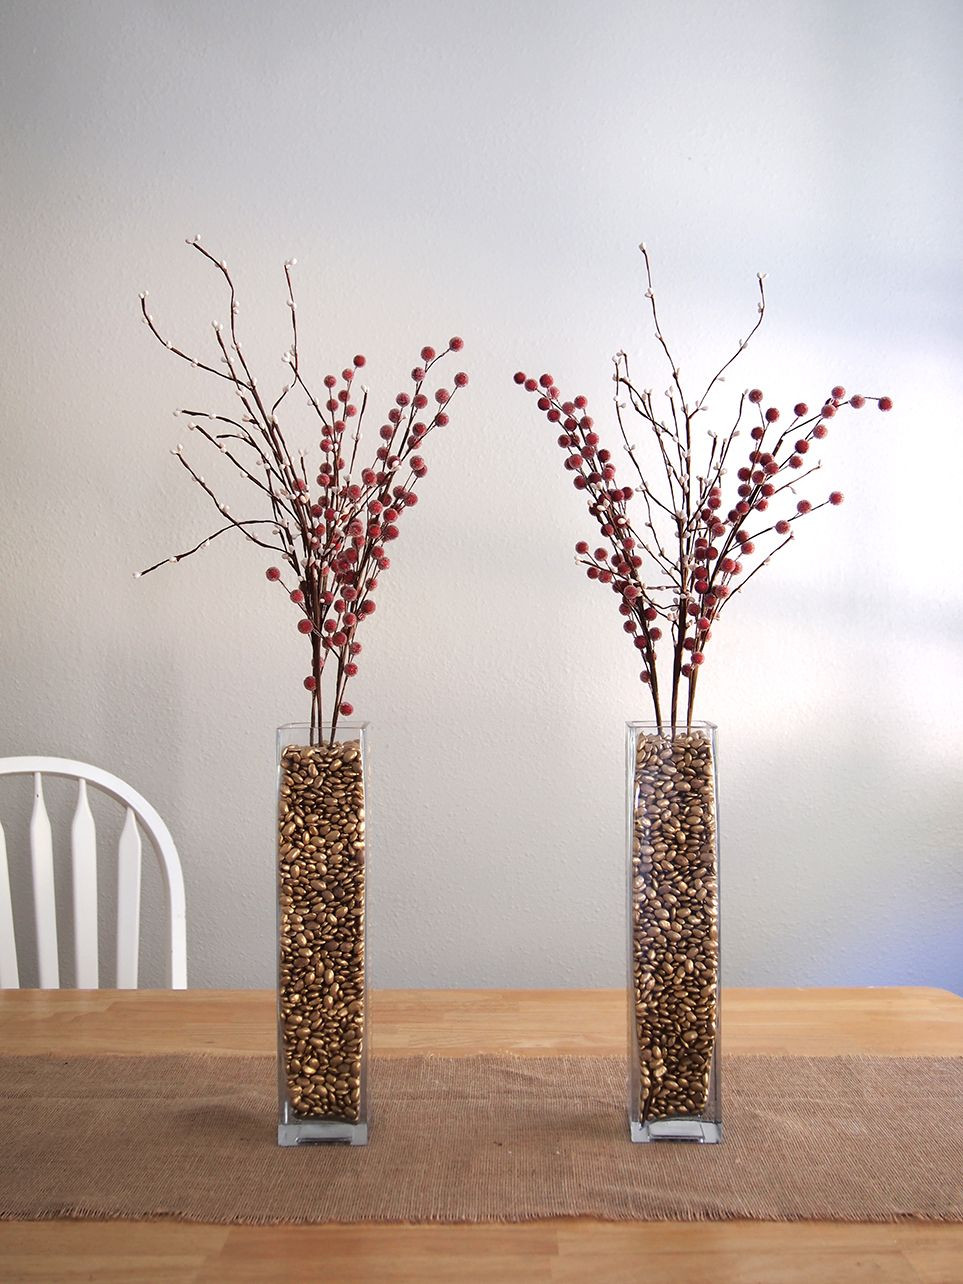 vase filler ideas for weddings of spray painted pinto beans used for vase filler great idea great in spray painted pinto beans used for vase filler great idea